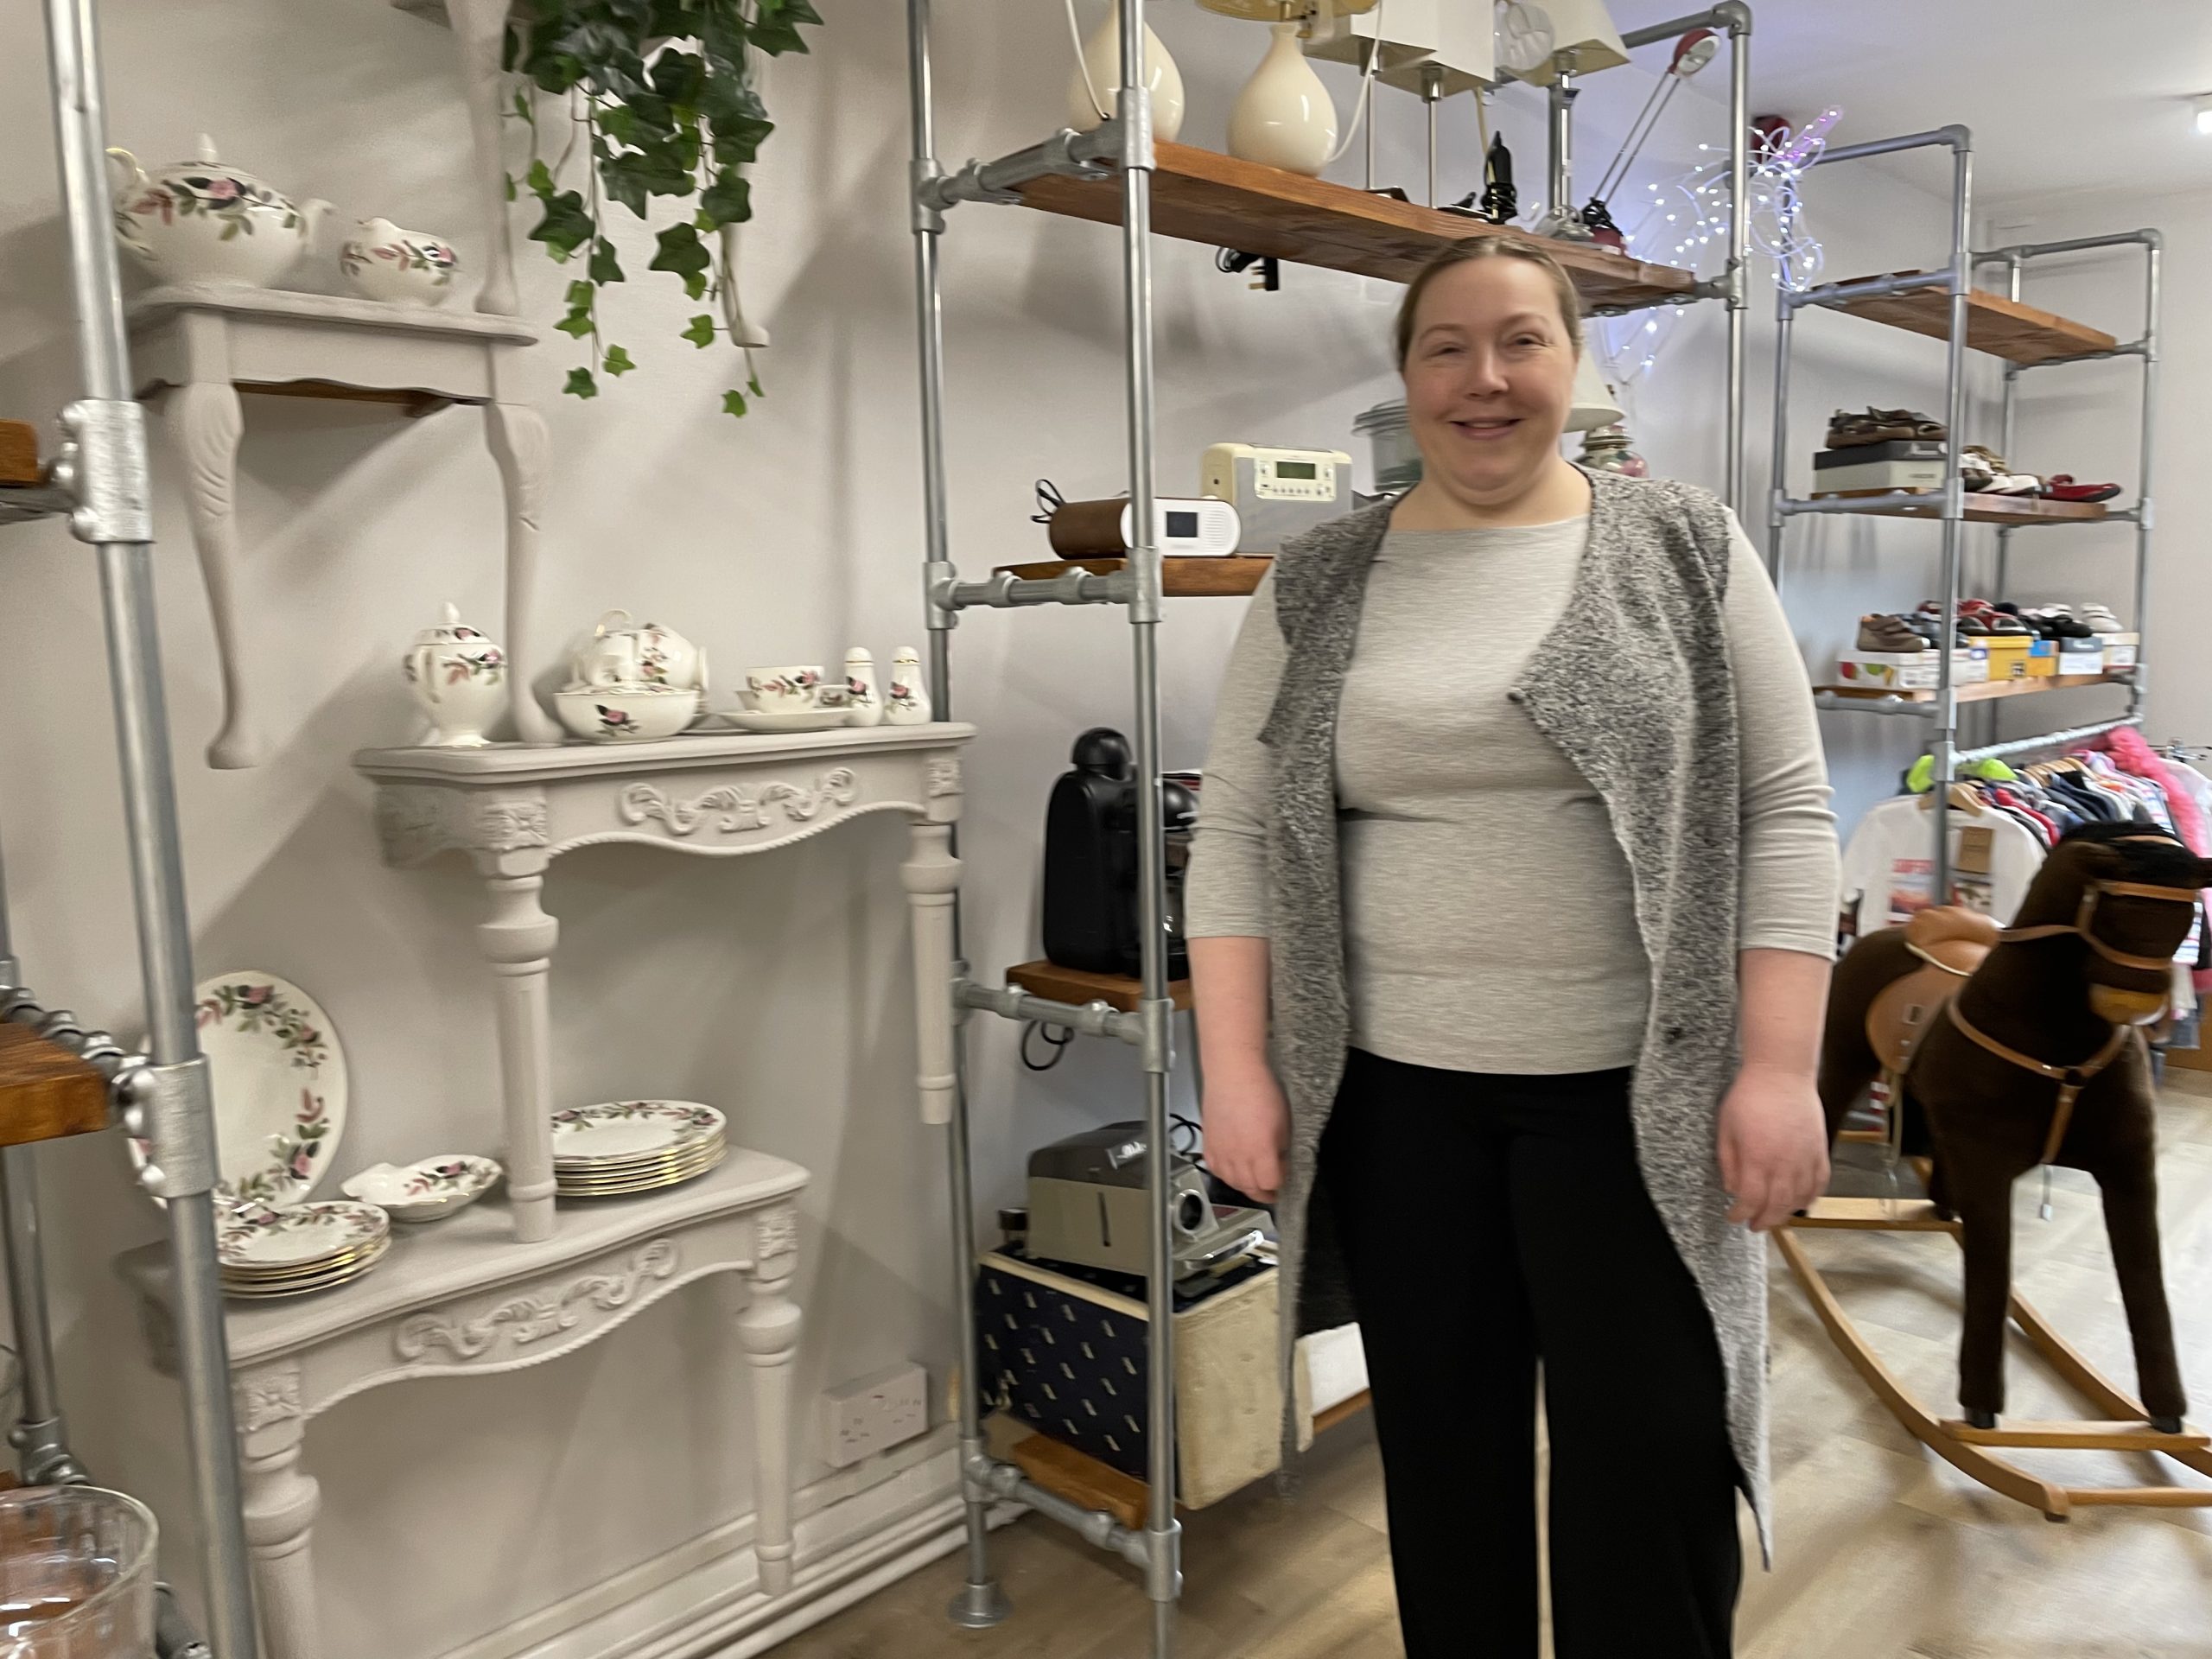 Bargain hunters are helping East Cheshire Hospice